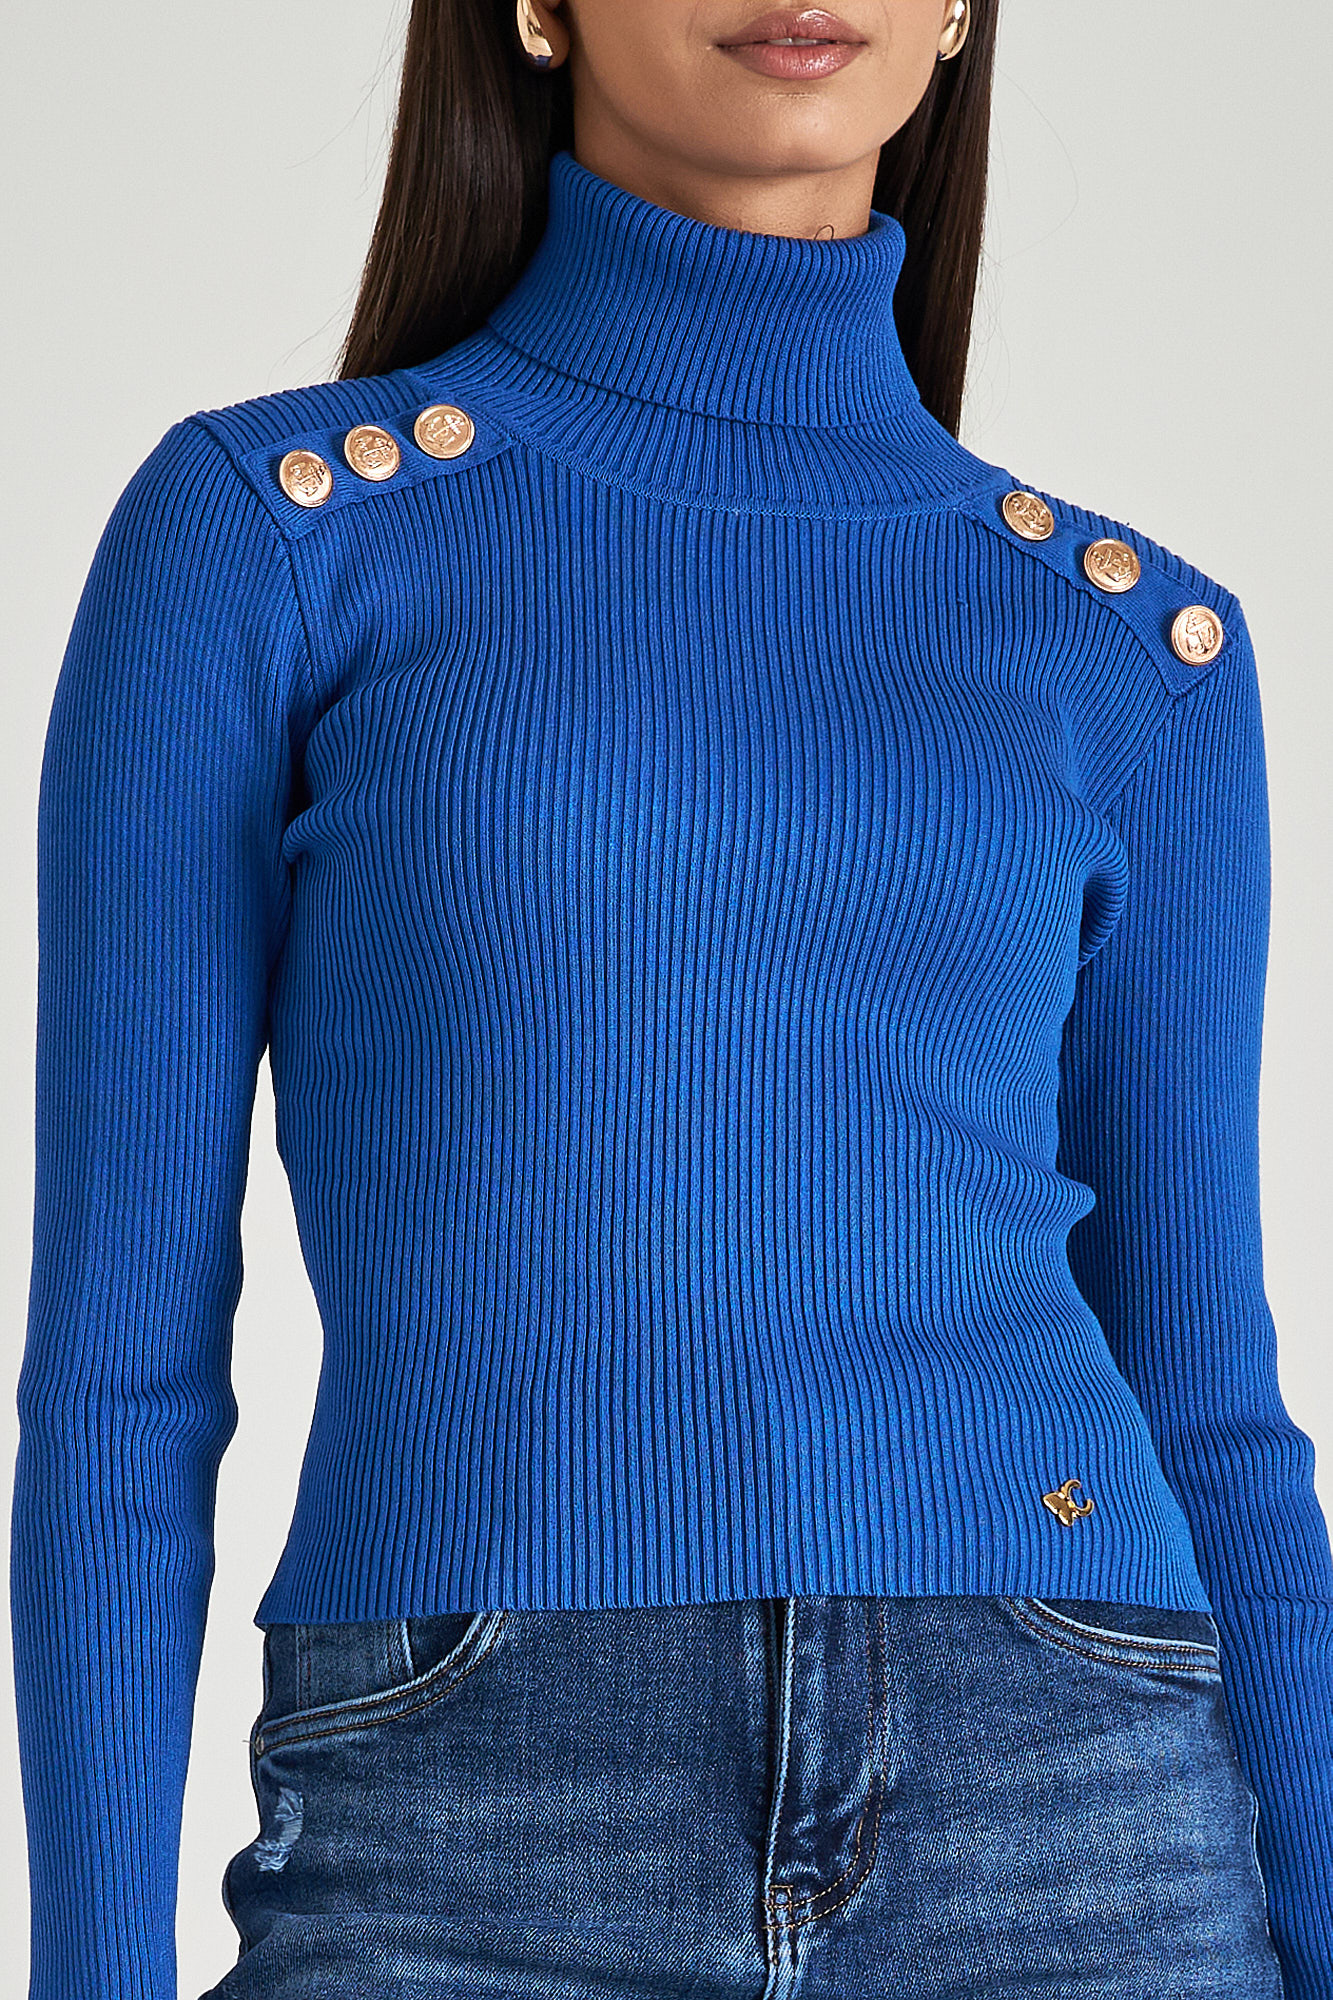 Picture of Rip sweater with gold buttons